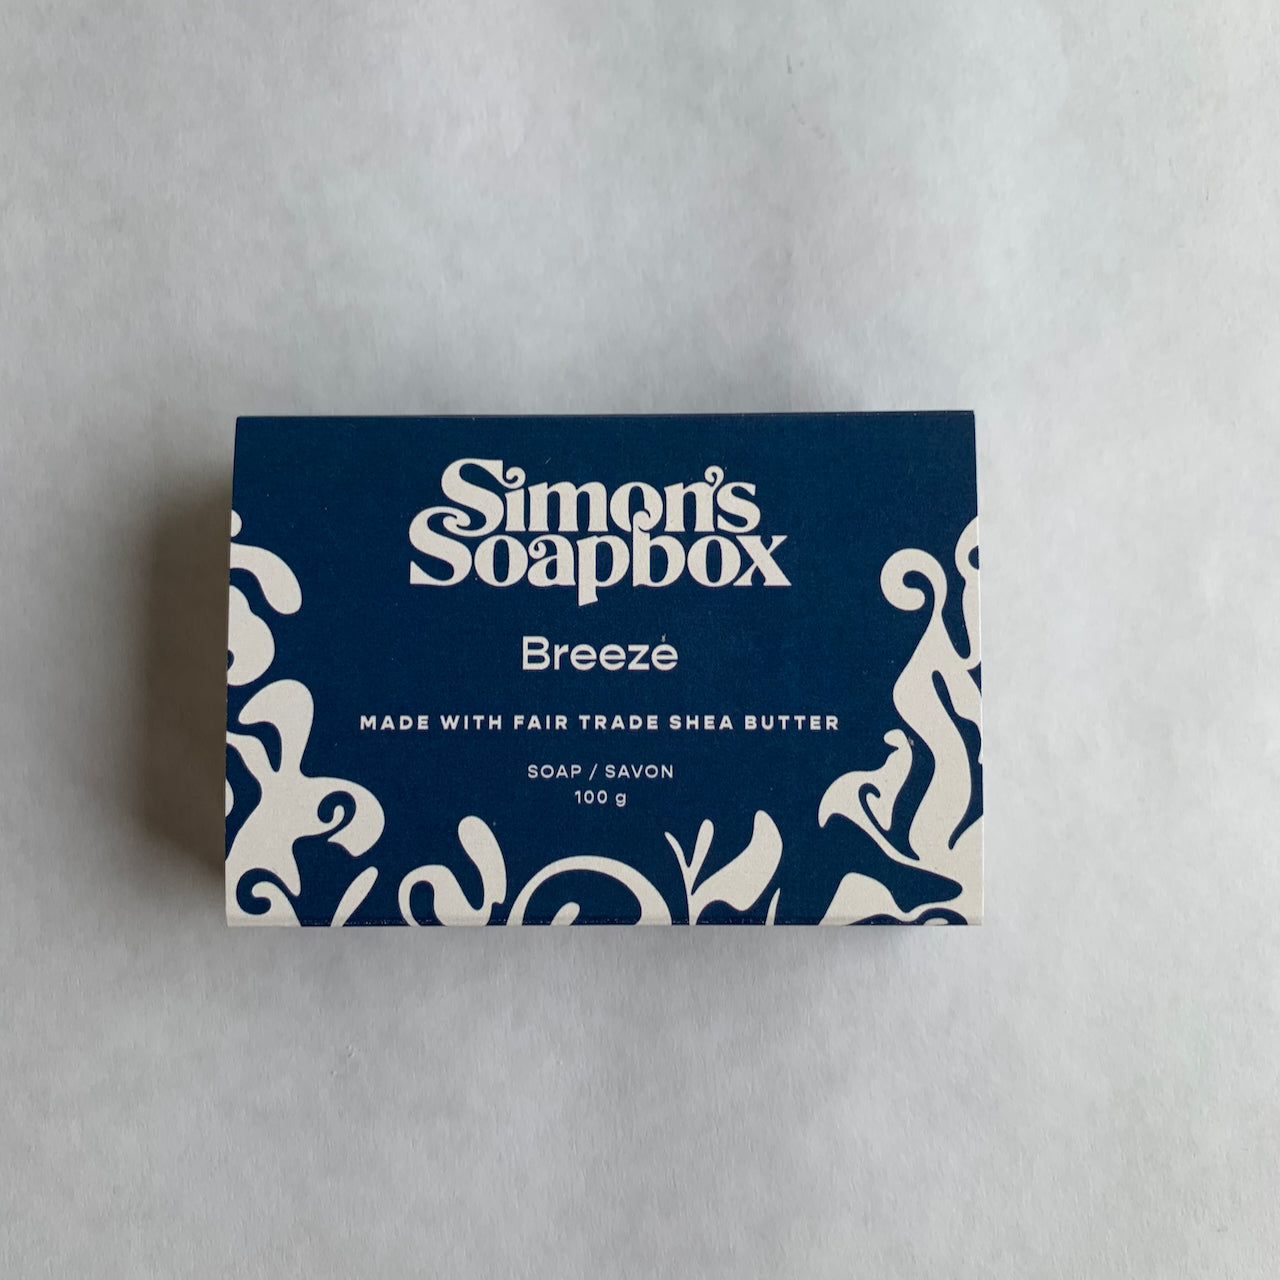 blue package of soap with swirl design and words Simons Soapbox Breeze, made with fair trade shea butter 100 g